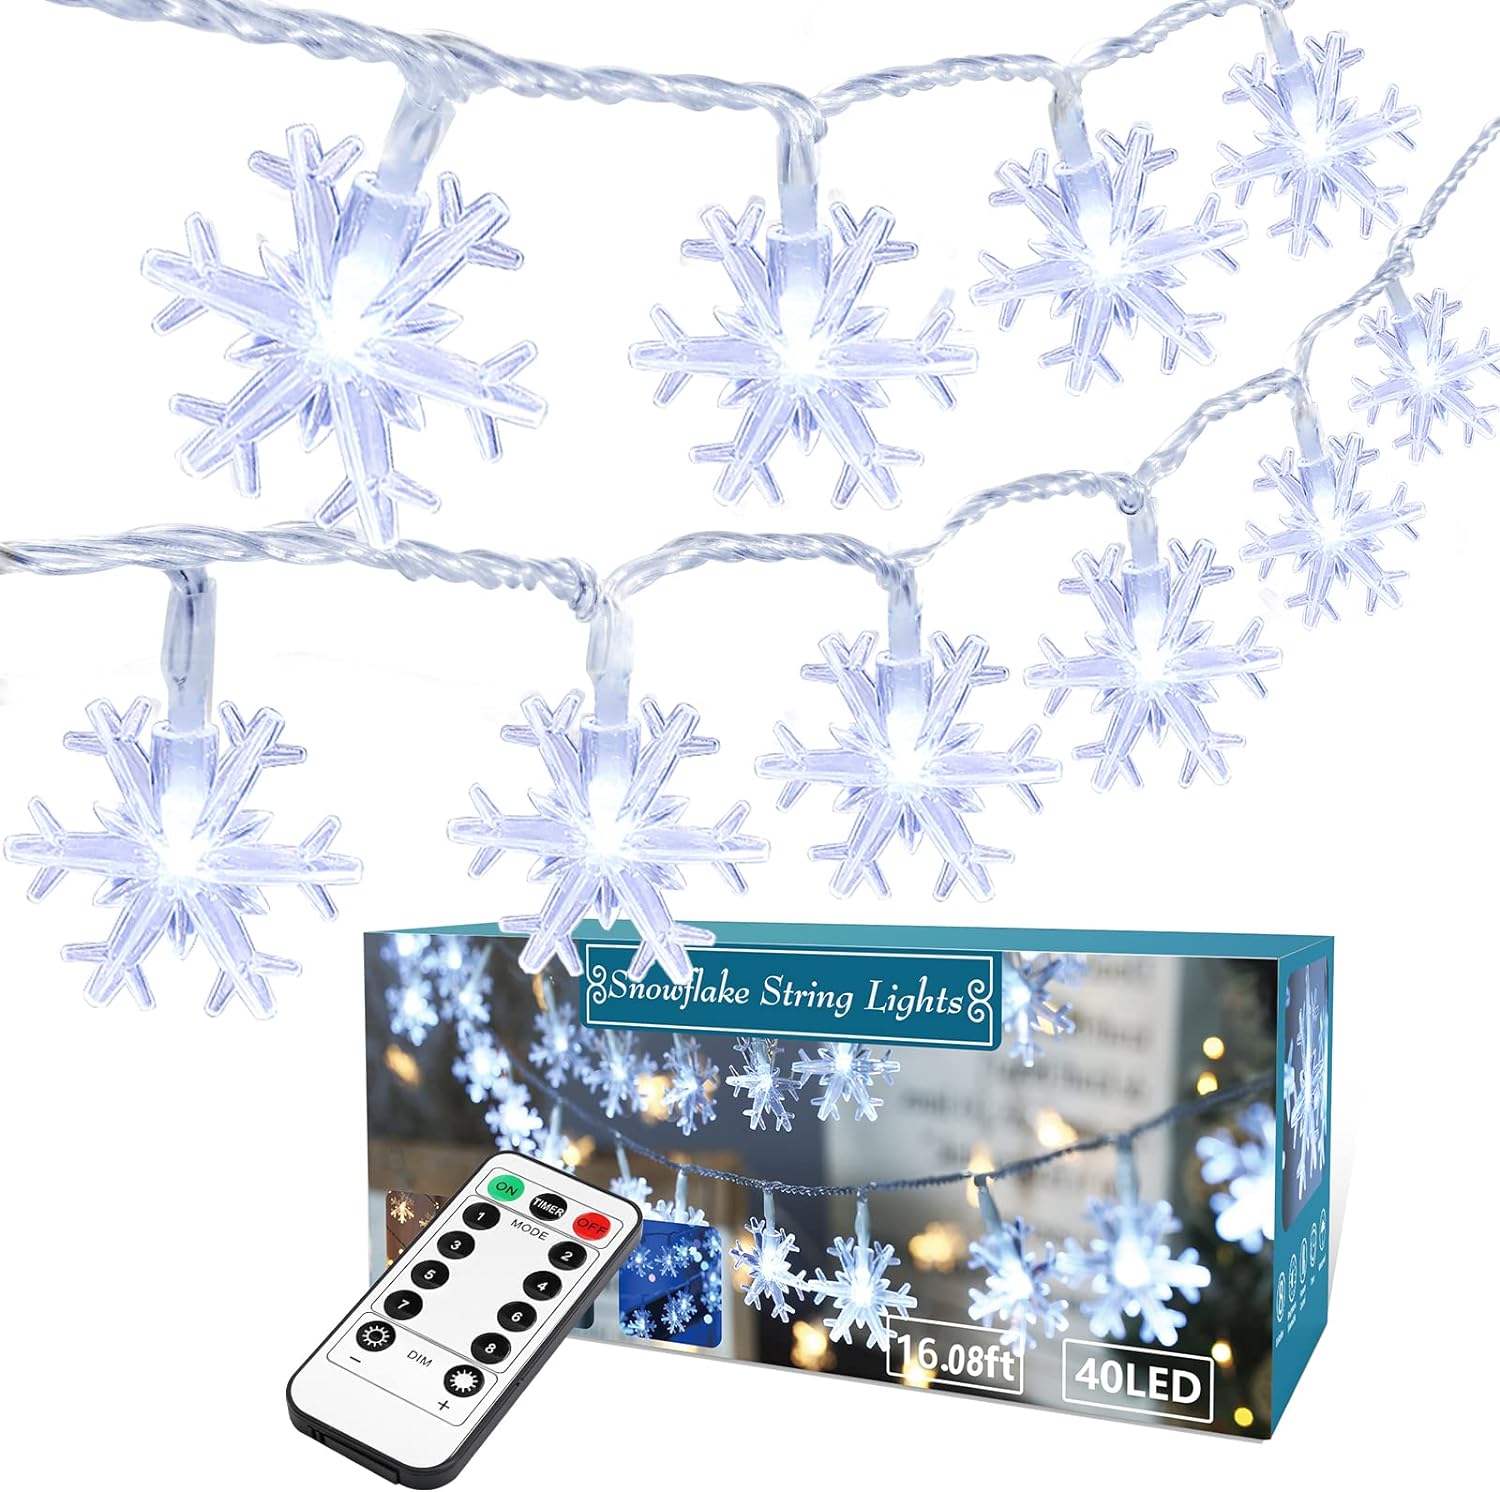 brizlabs Snowflake Christmas Lights, 16.08ft 40 LED Christmas Lights with Remote, Snowflake String Lights Battery Operated, 8 Modes Xmas